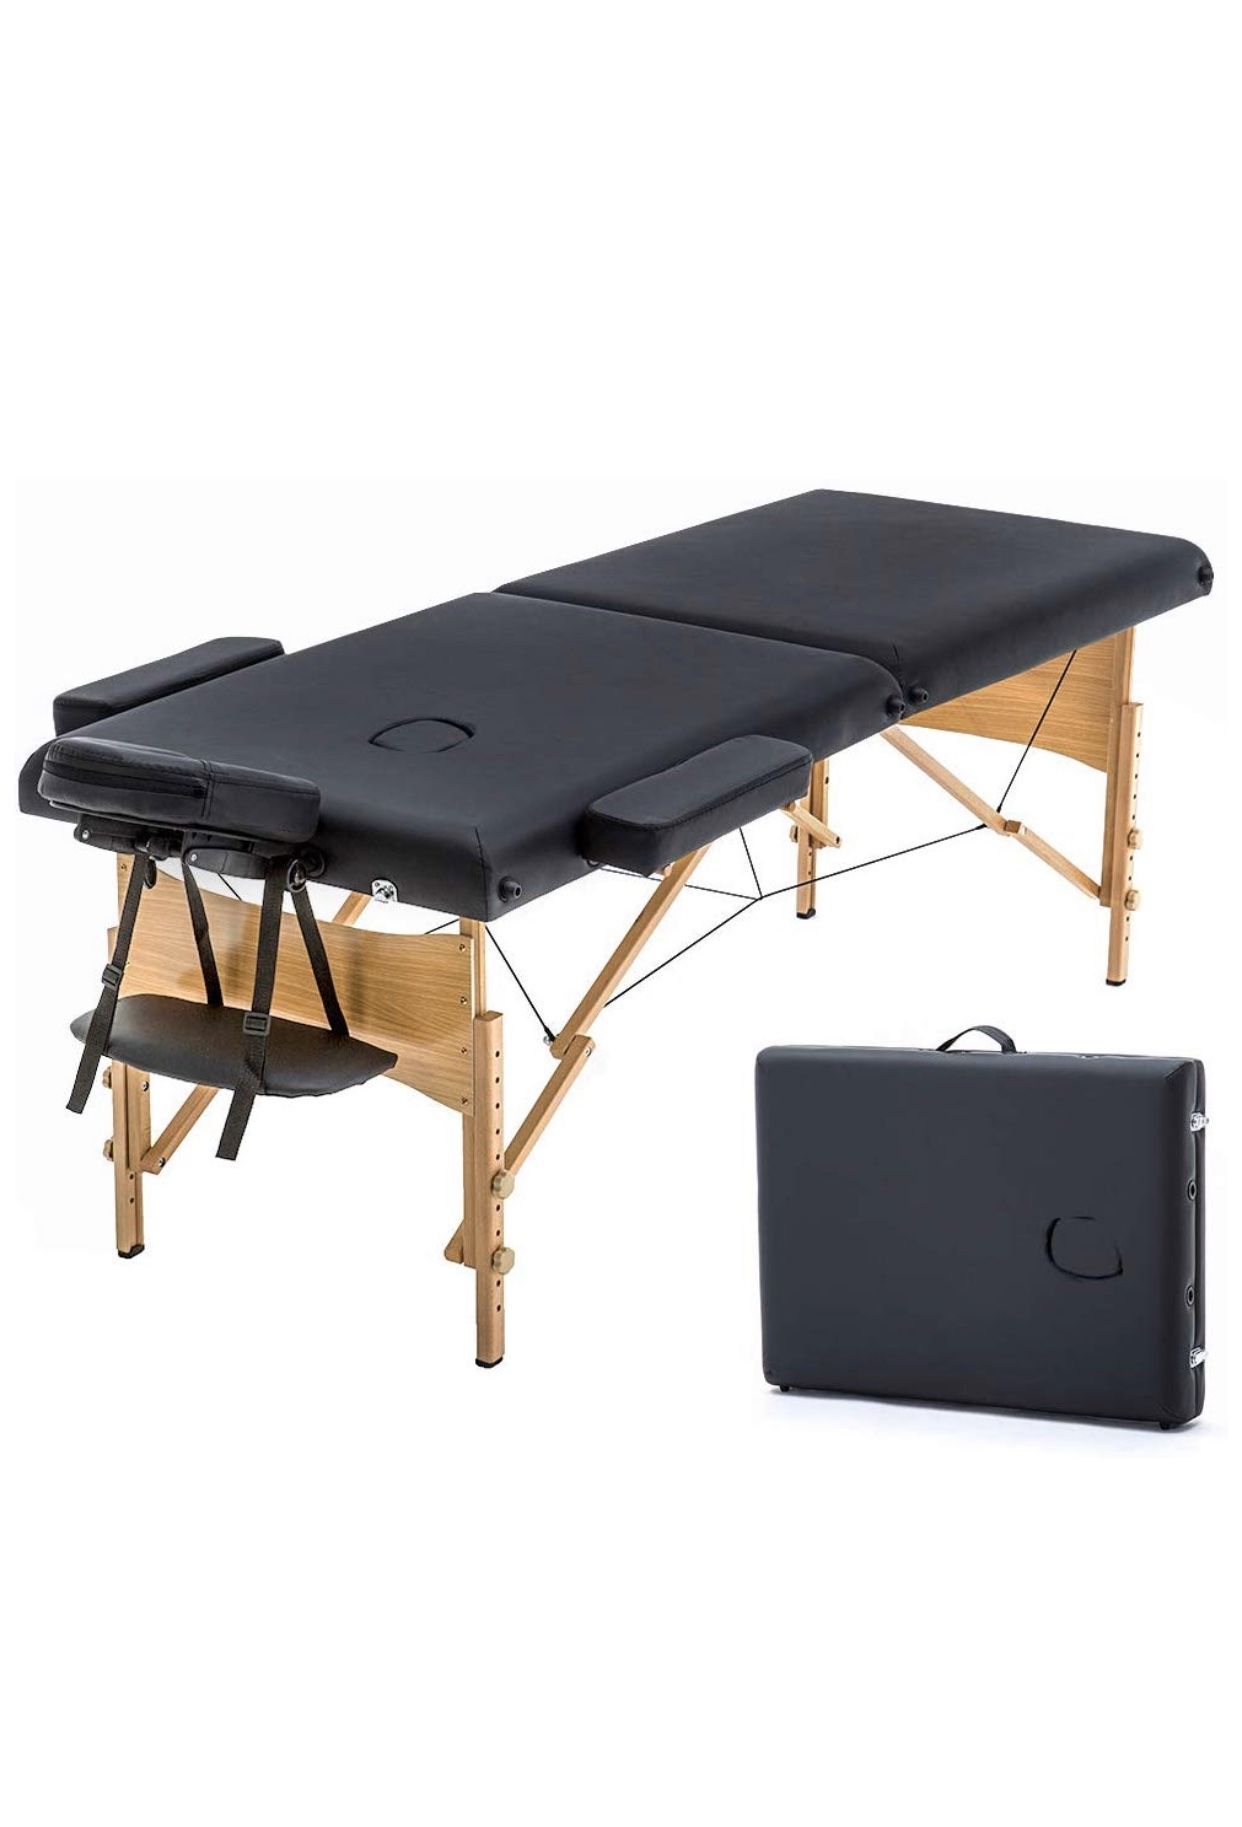 Brand new massage table... Must Go